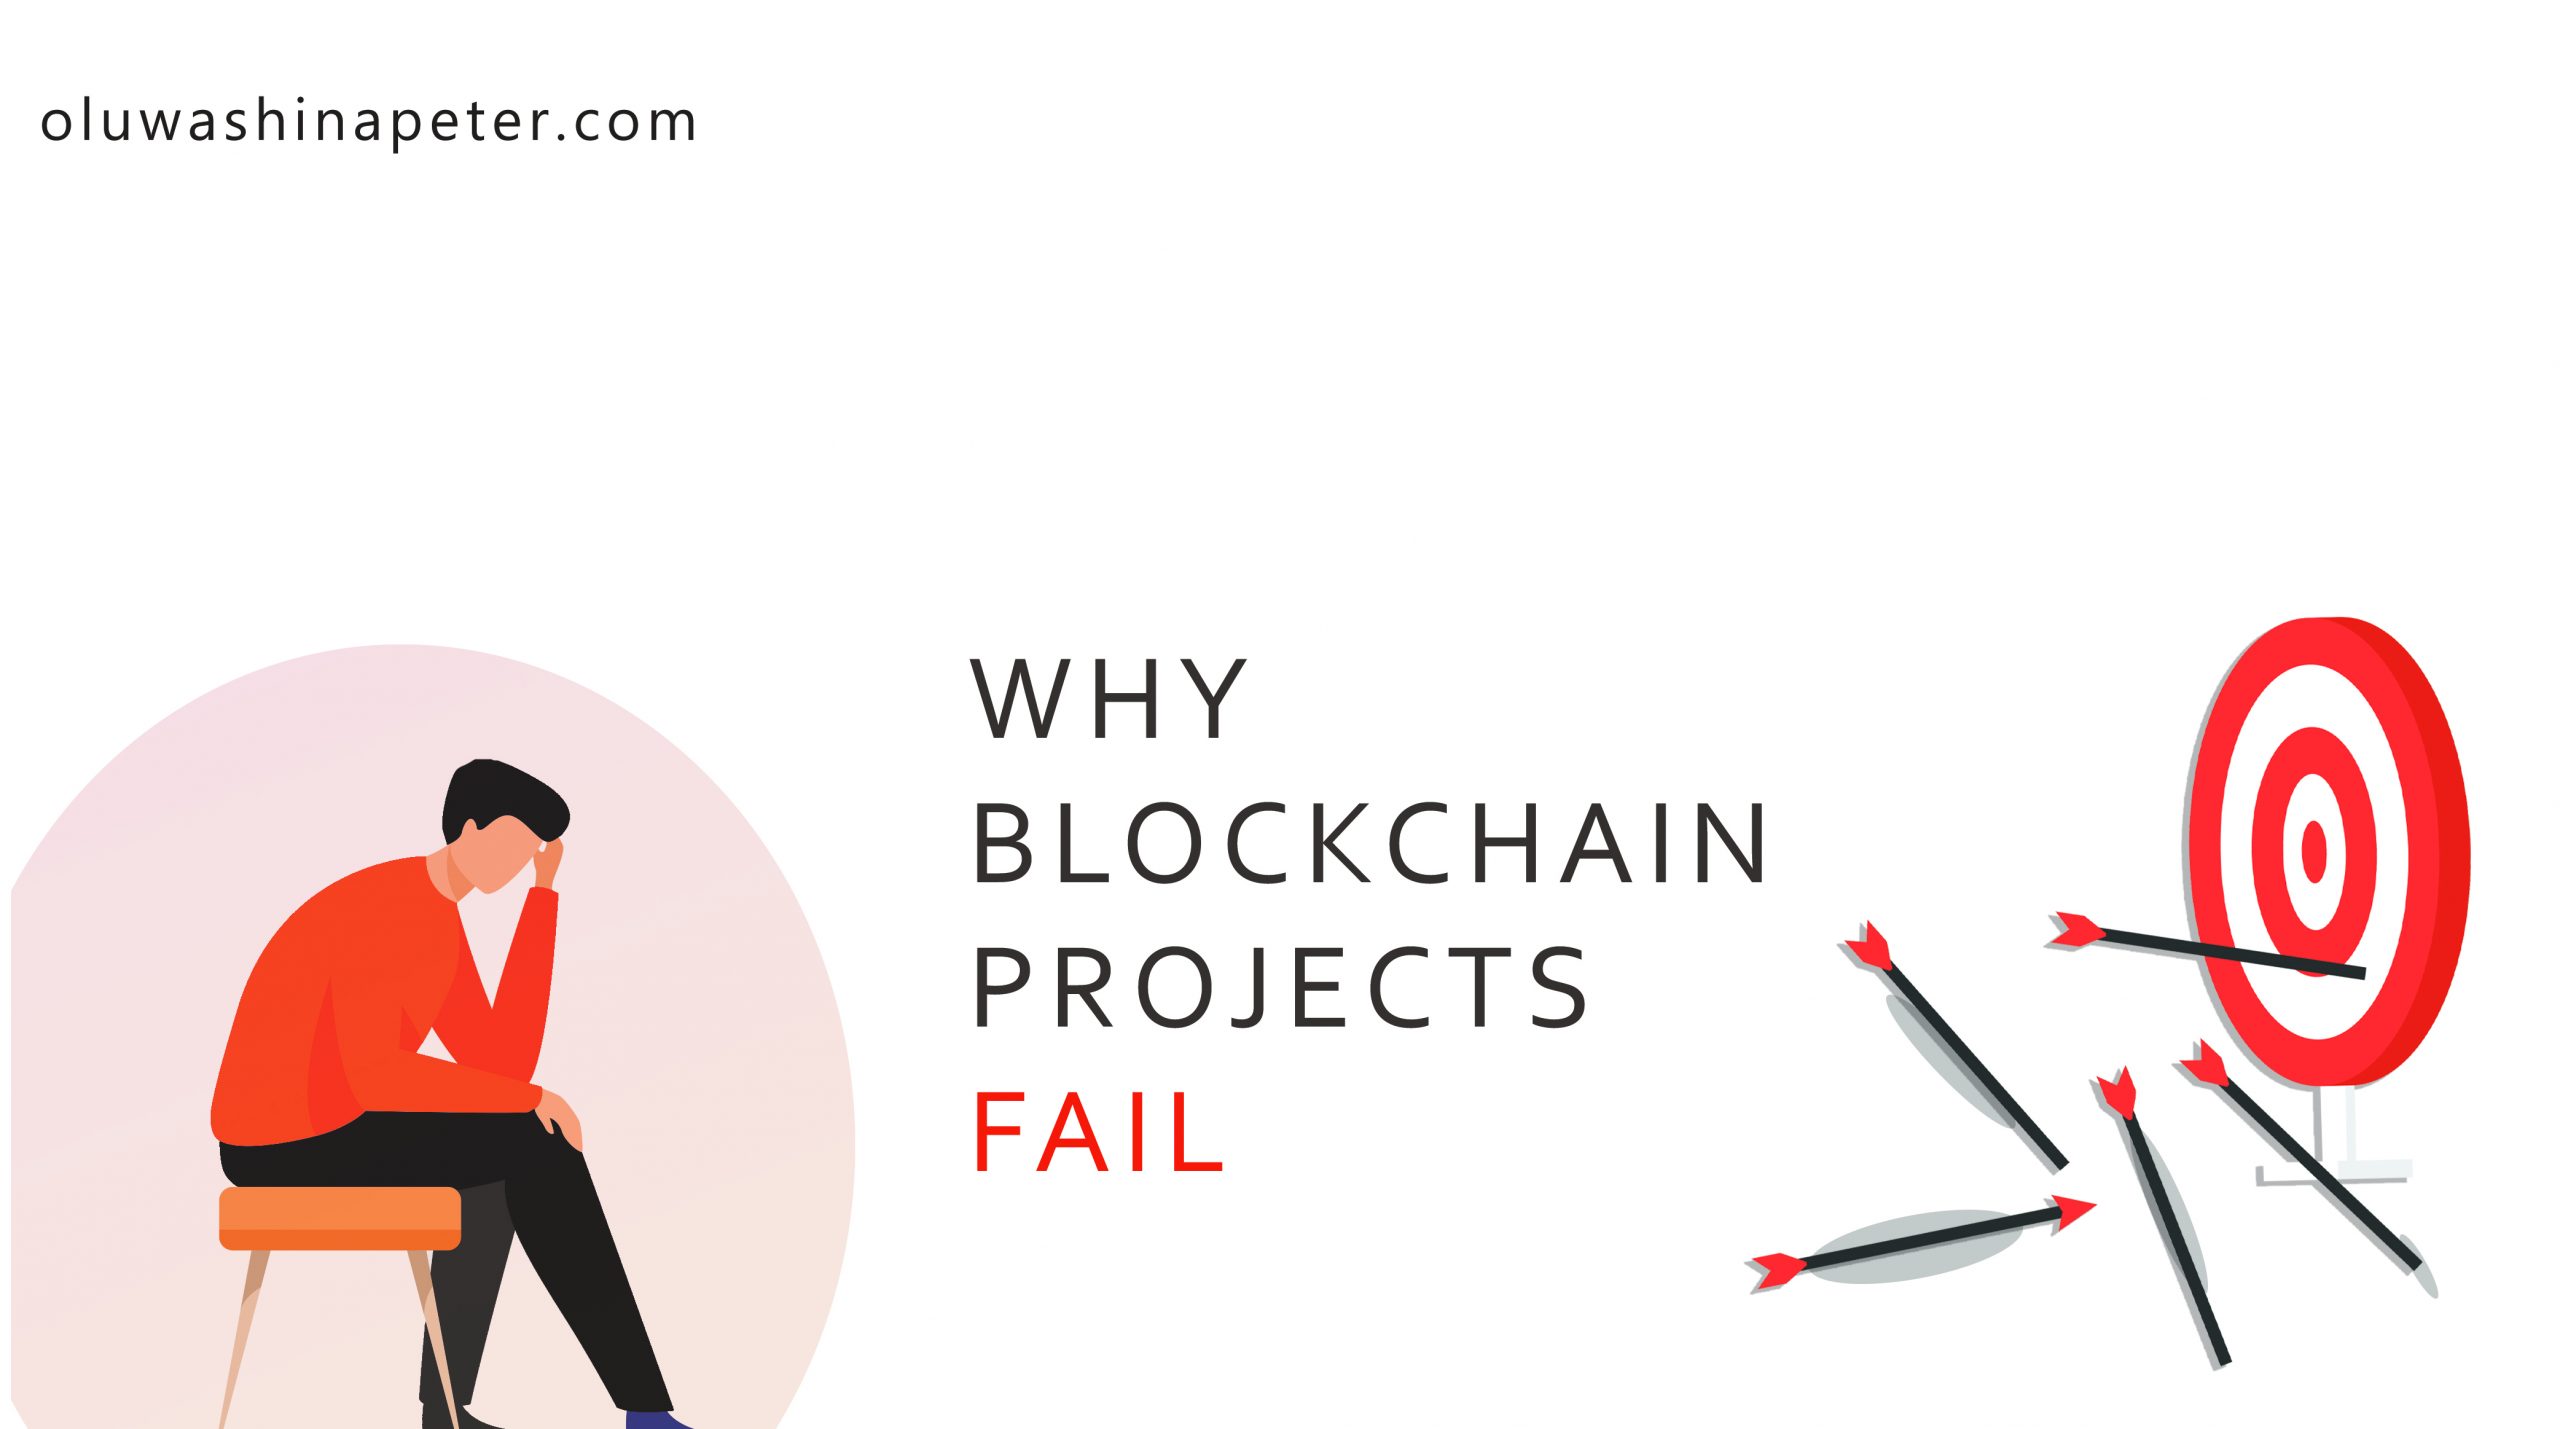 blockchain projects trying to hit the mark but missing the target